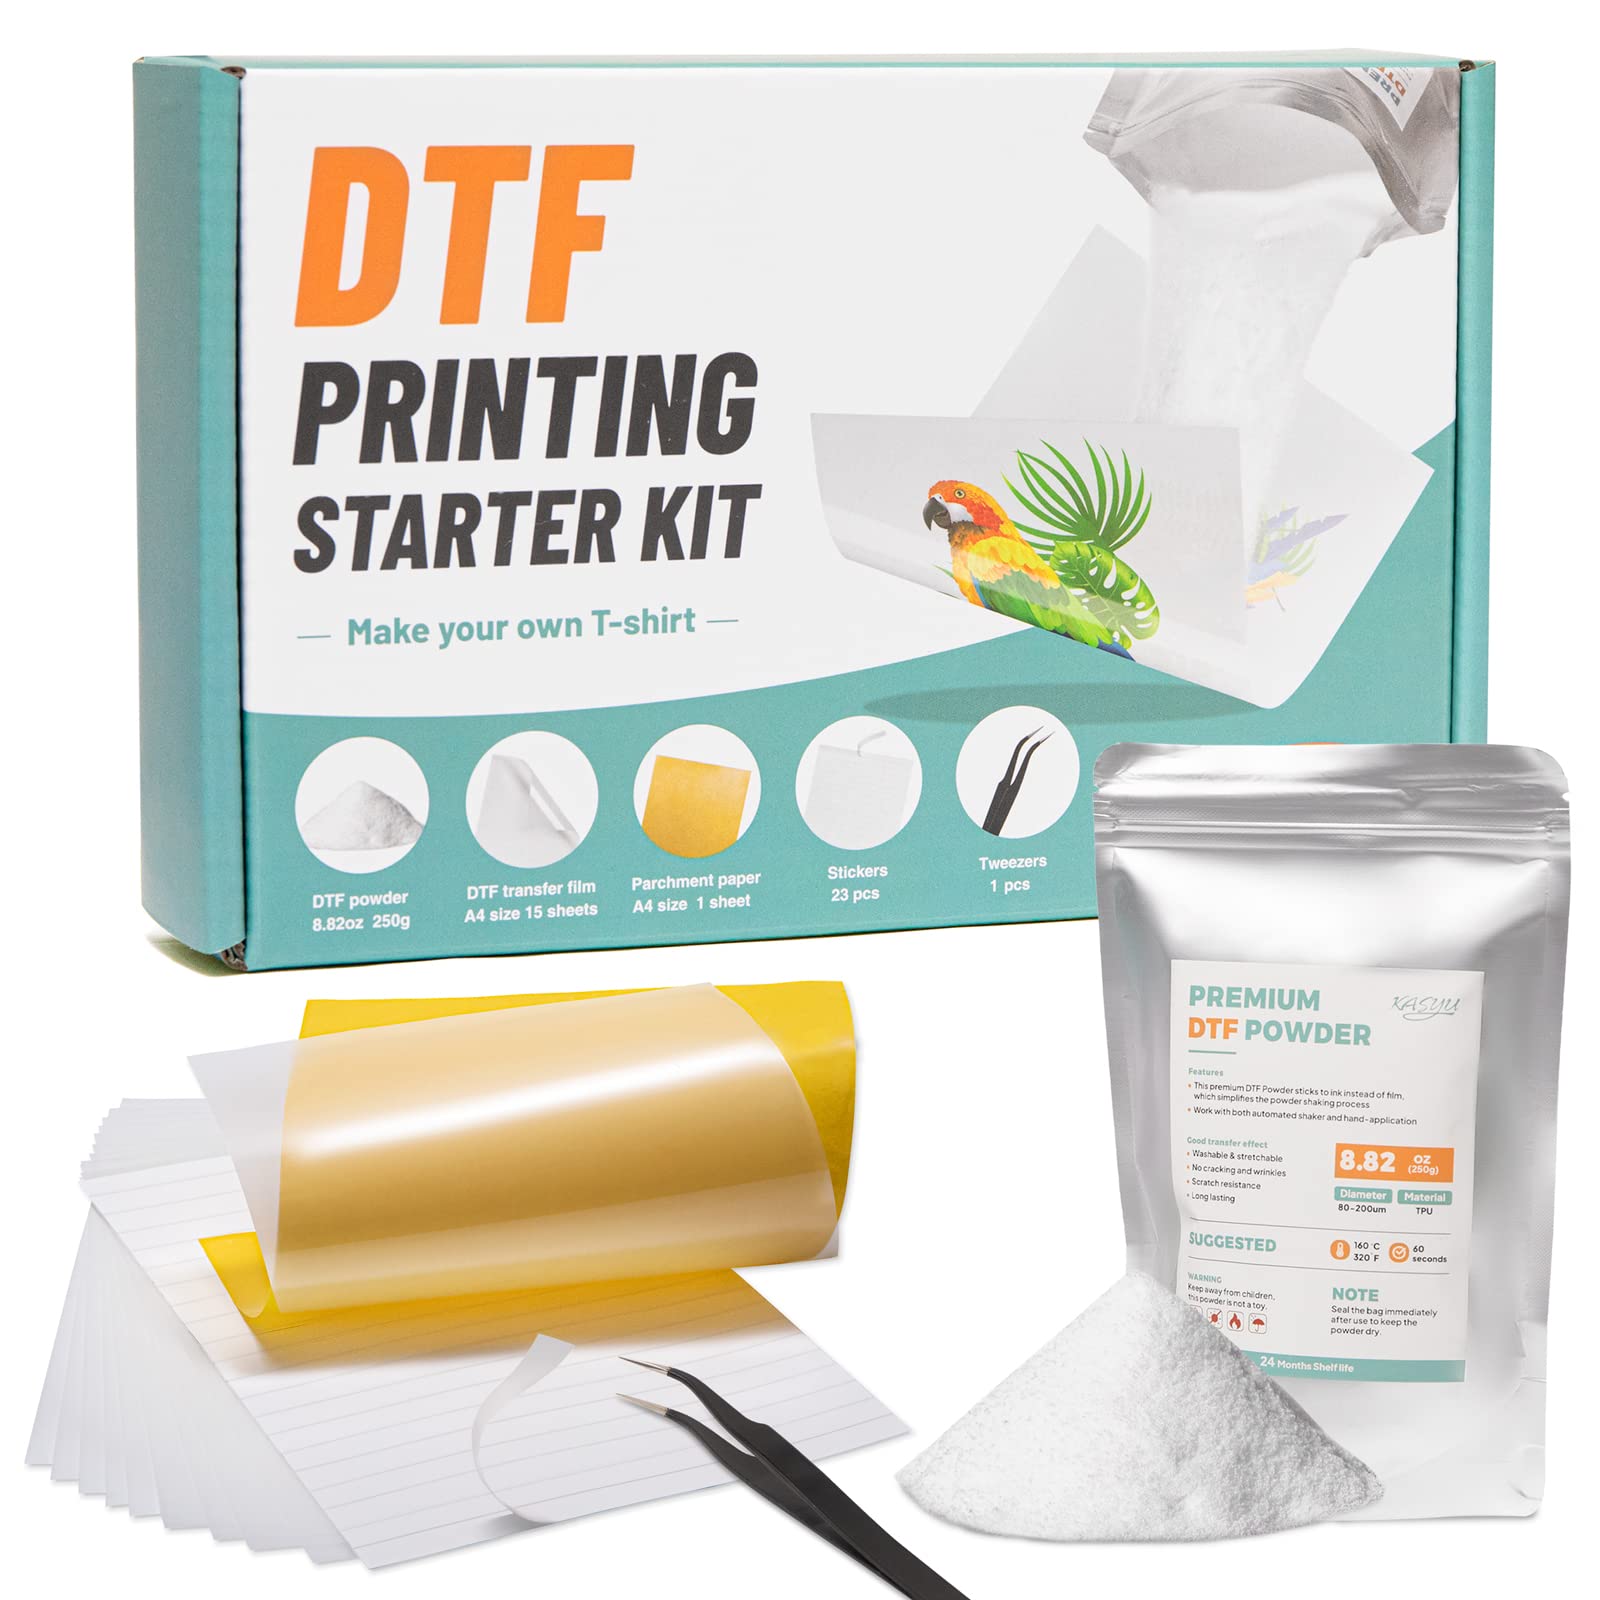 DTF hot melt powder for dtf DIY prnting high quality and